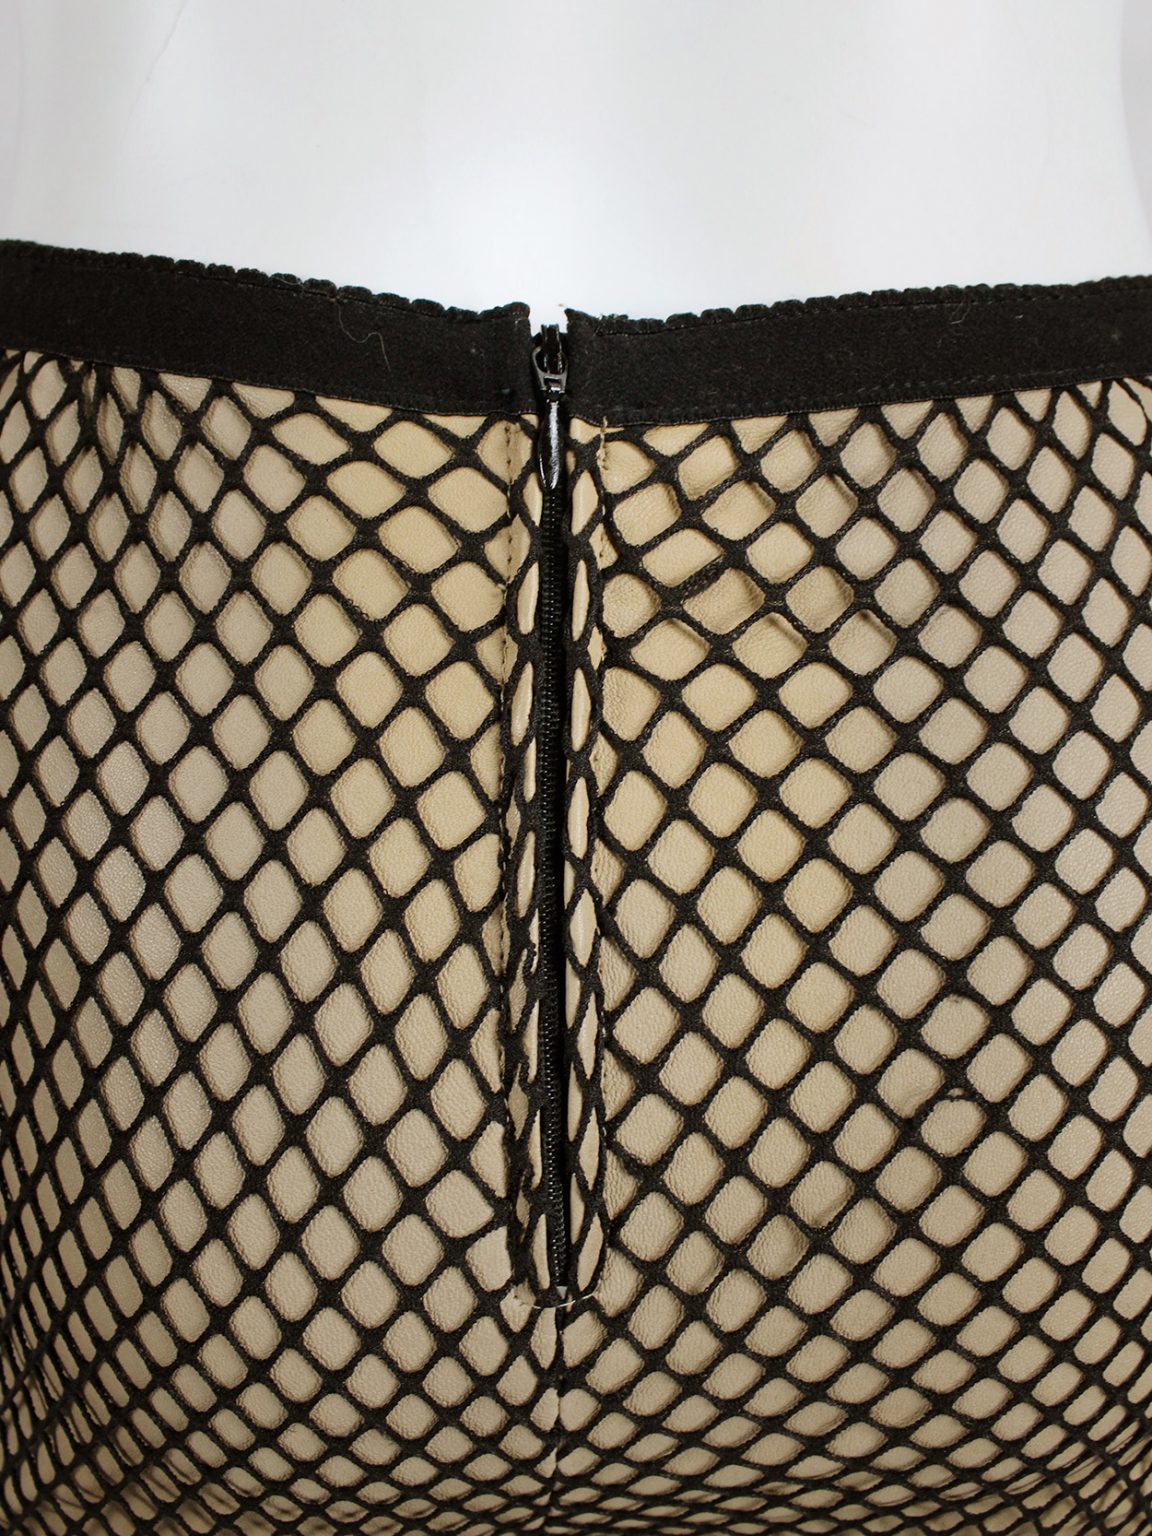 Maison Martin Margiela nude leather trousers with black fishnet overlayer — fall 2011